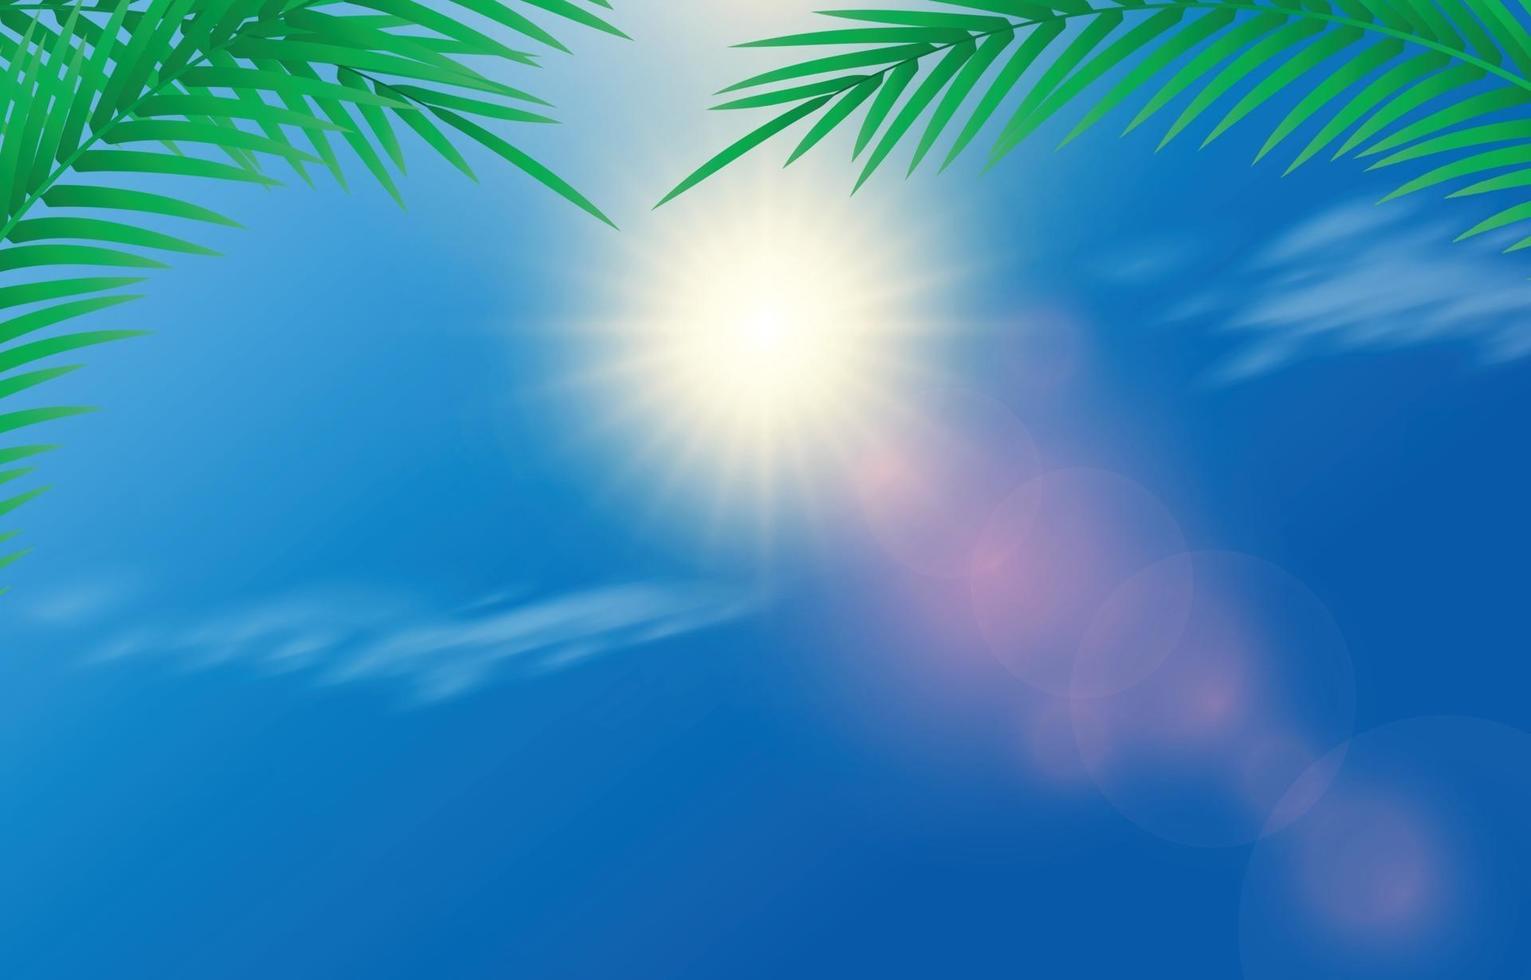 Sun and Light Flare Background vector